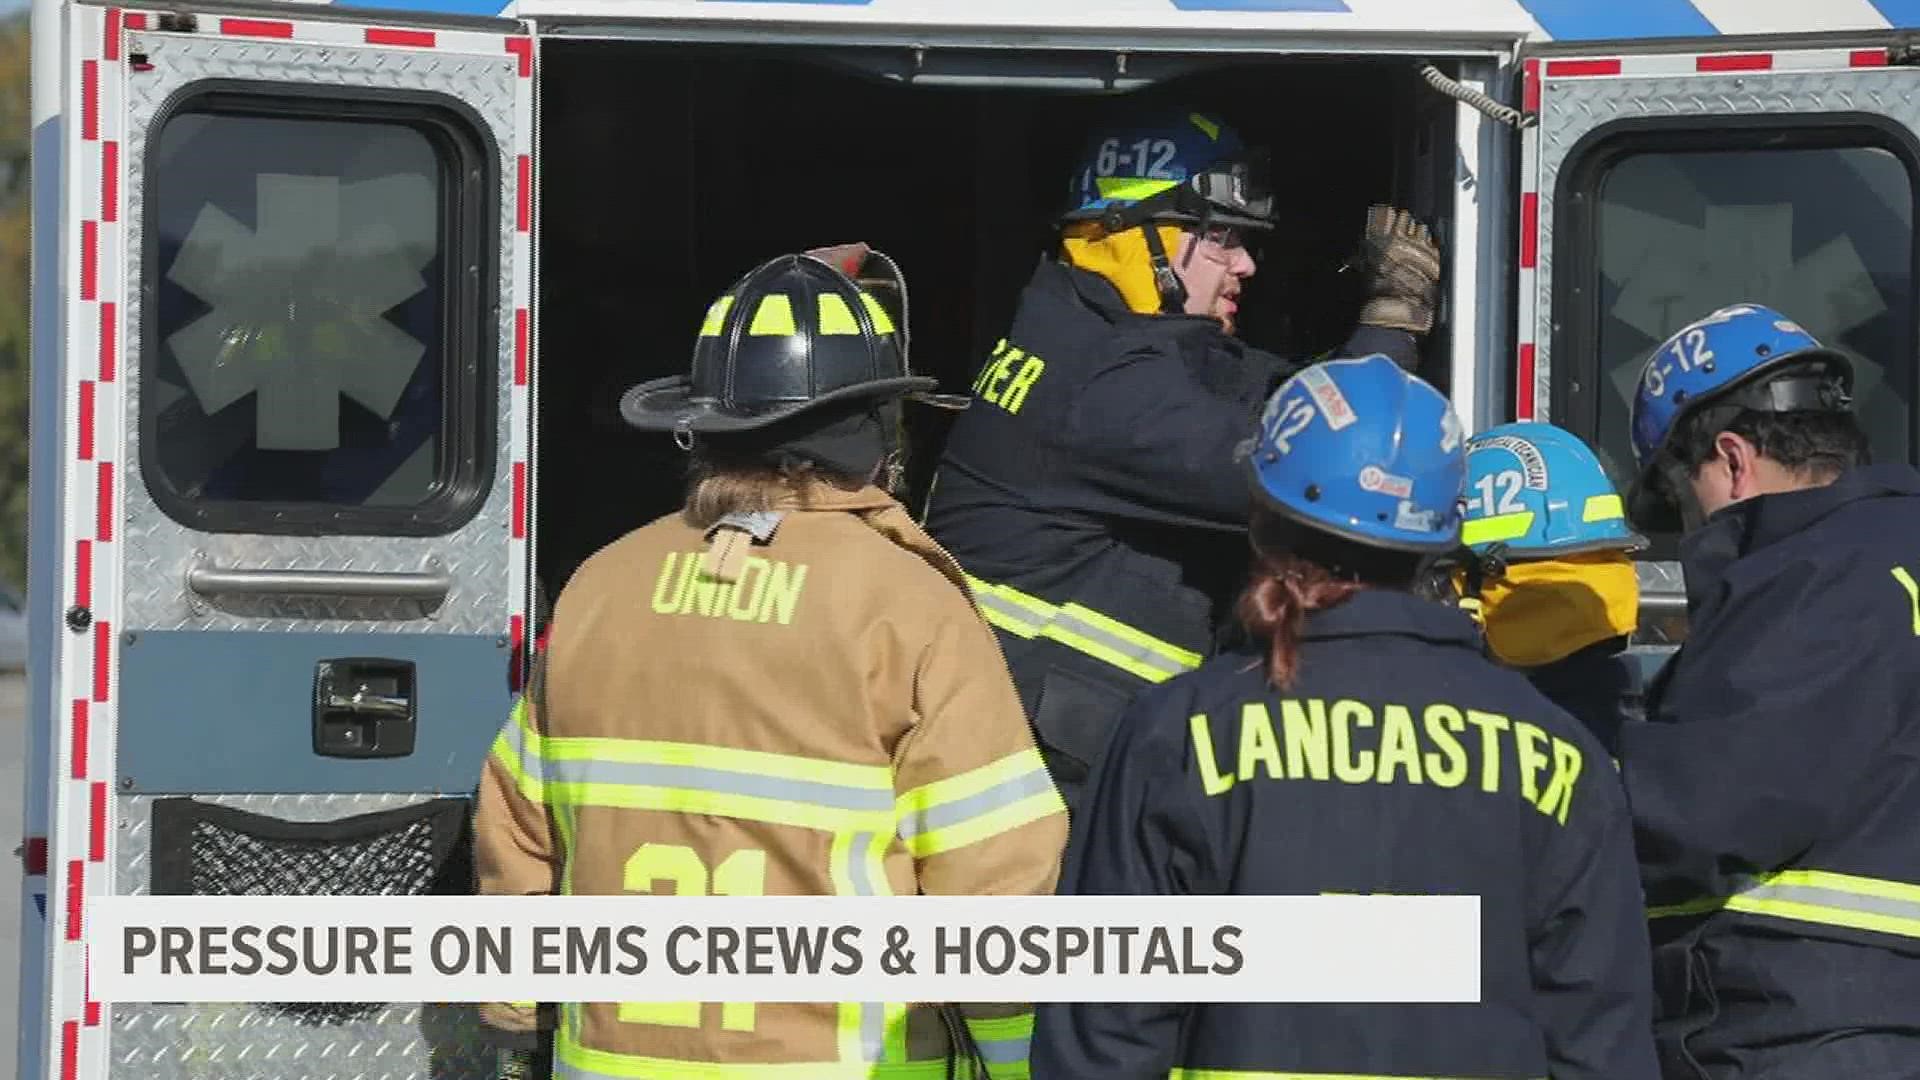 Several EMS crews and hospitals report they have seen an influx of calls and patients as they scramble to find more beds and staffing